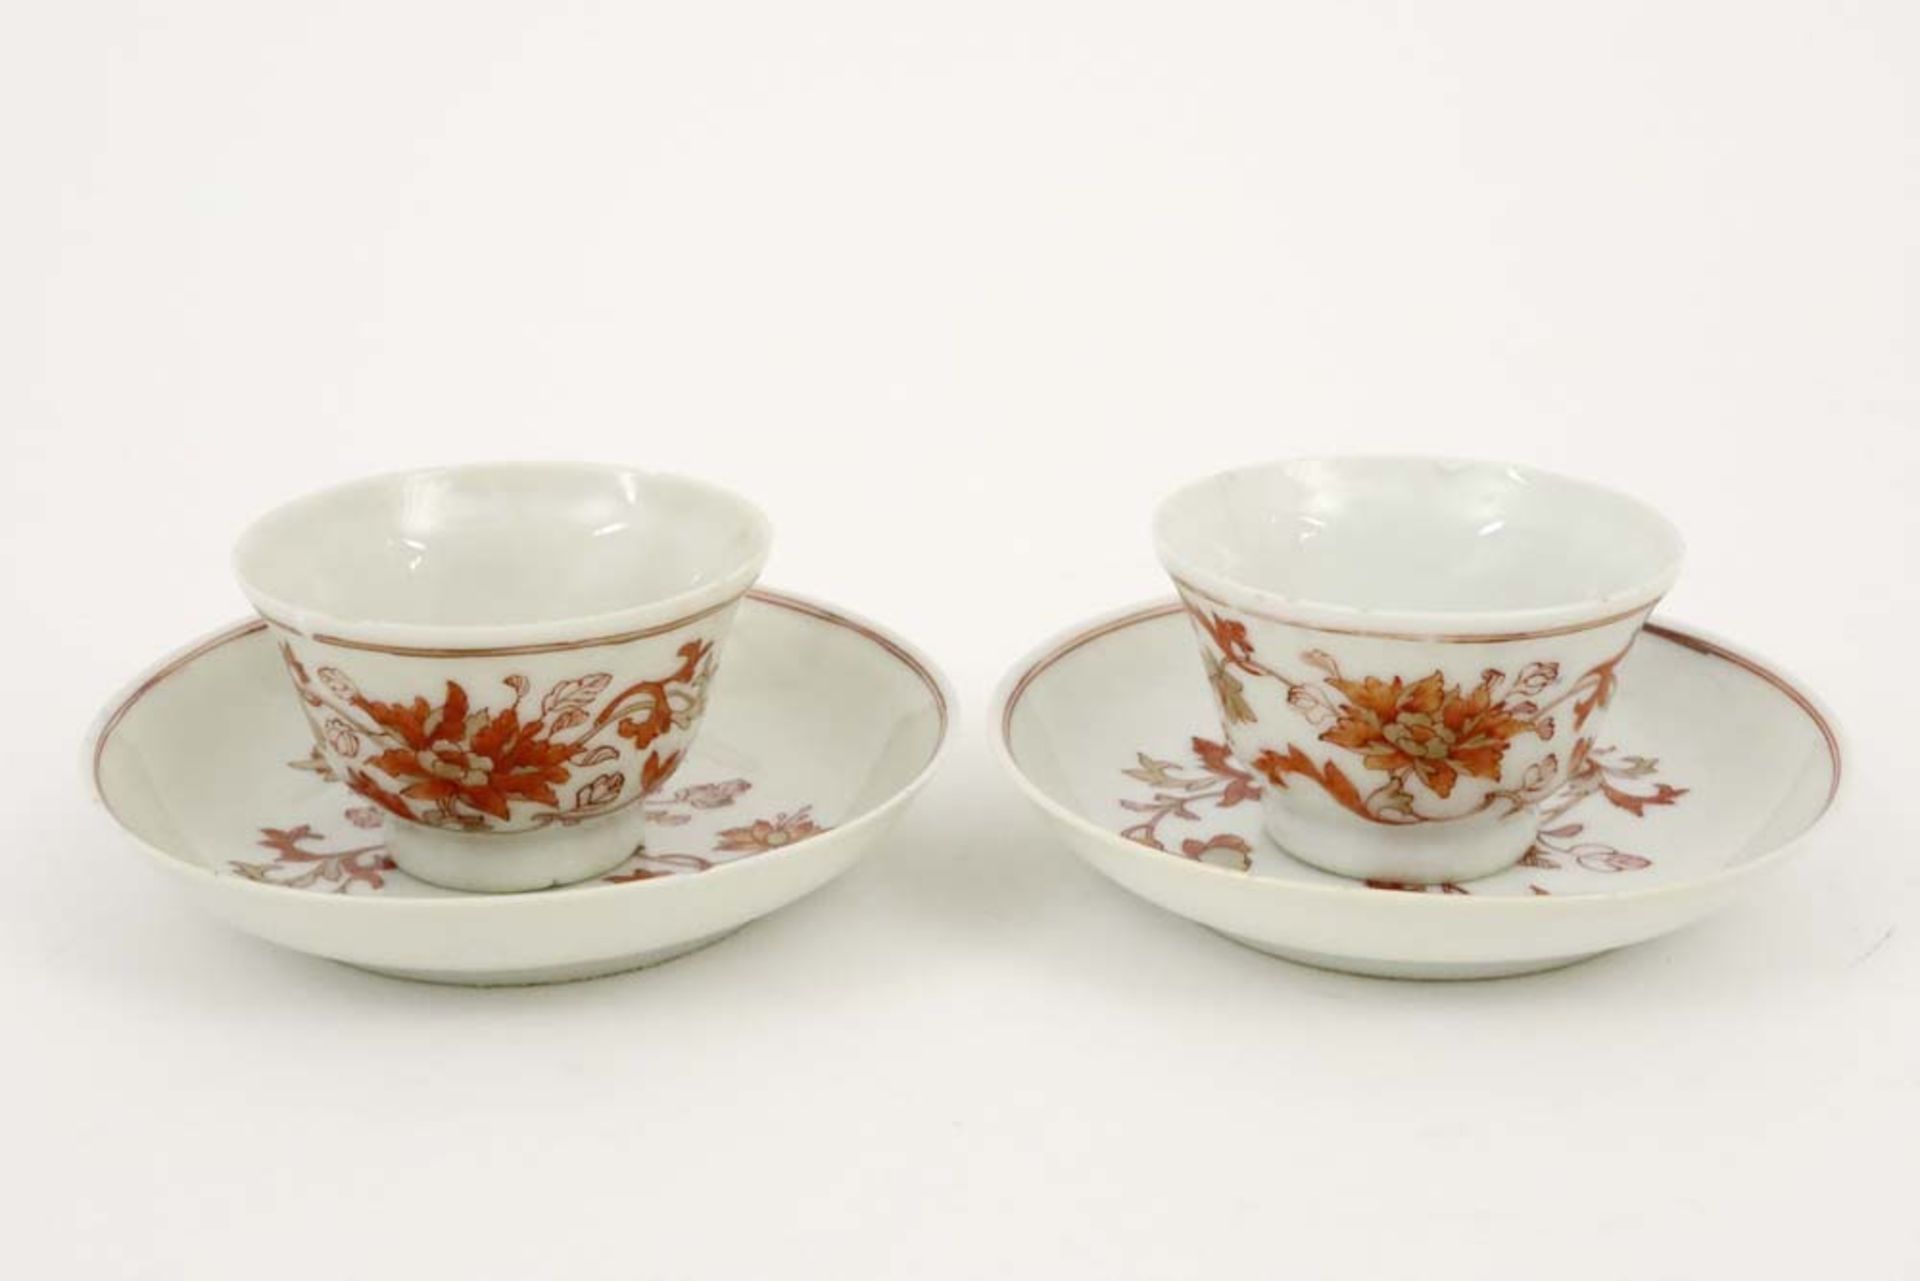 two 18th Cent. Chinese sets of cup and saucer in porcelain with a flower decor in sanguine colors - Image 3 of 7